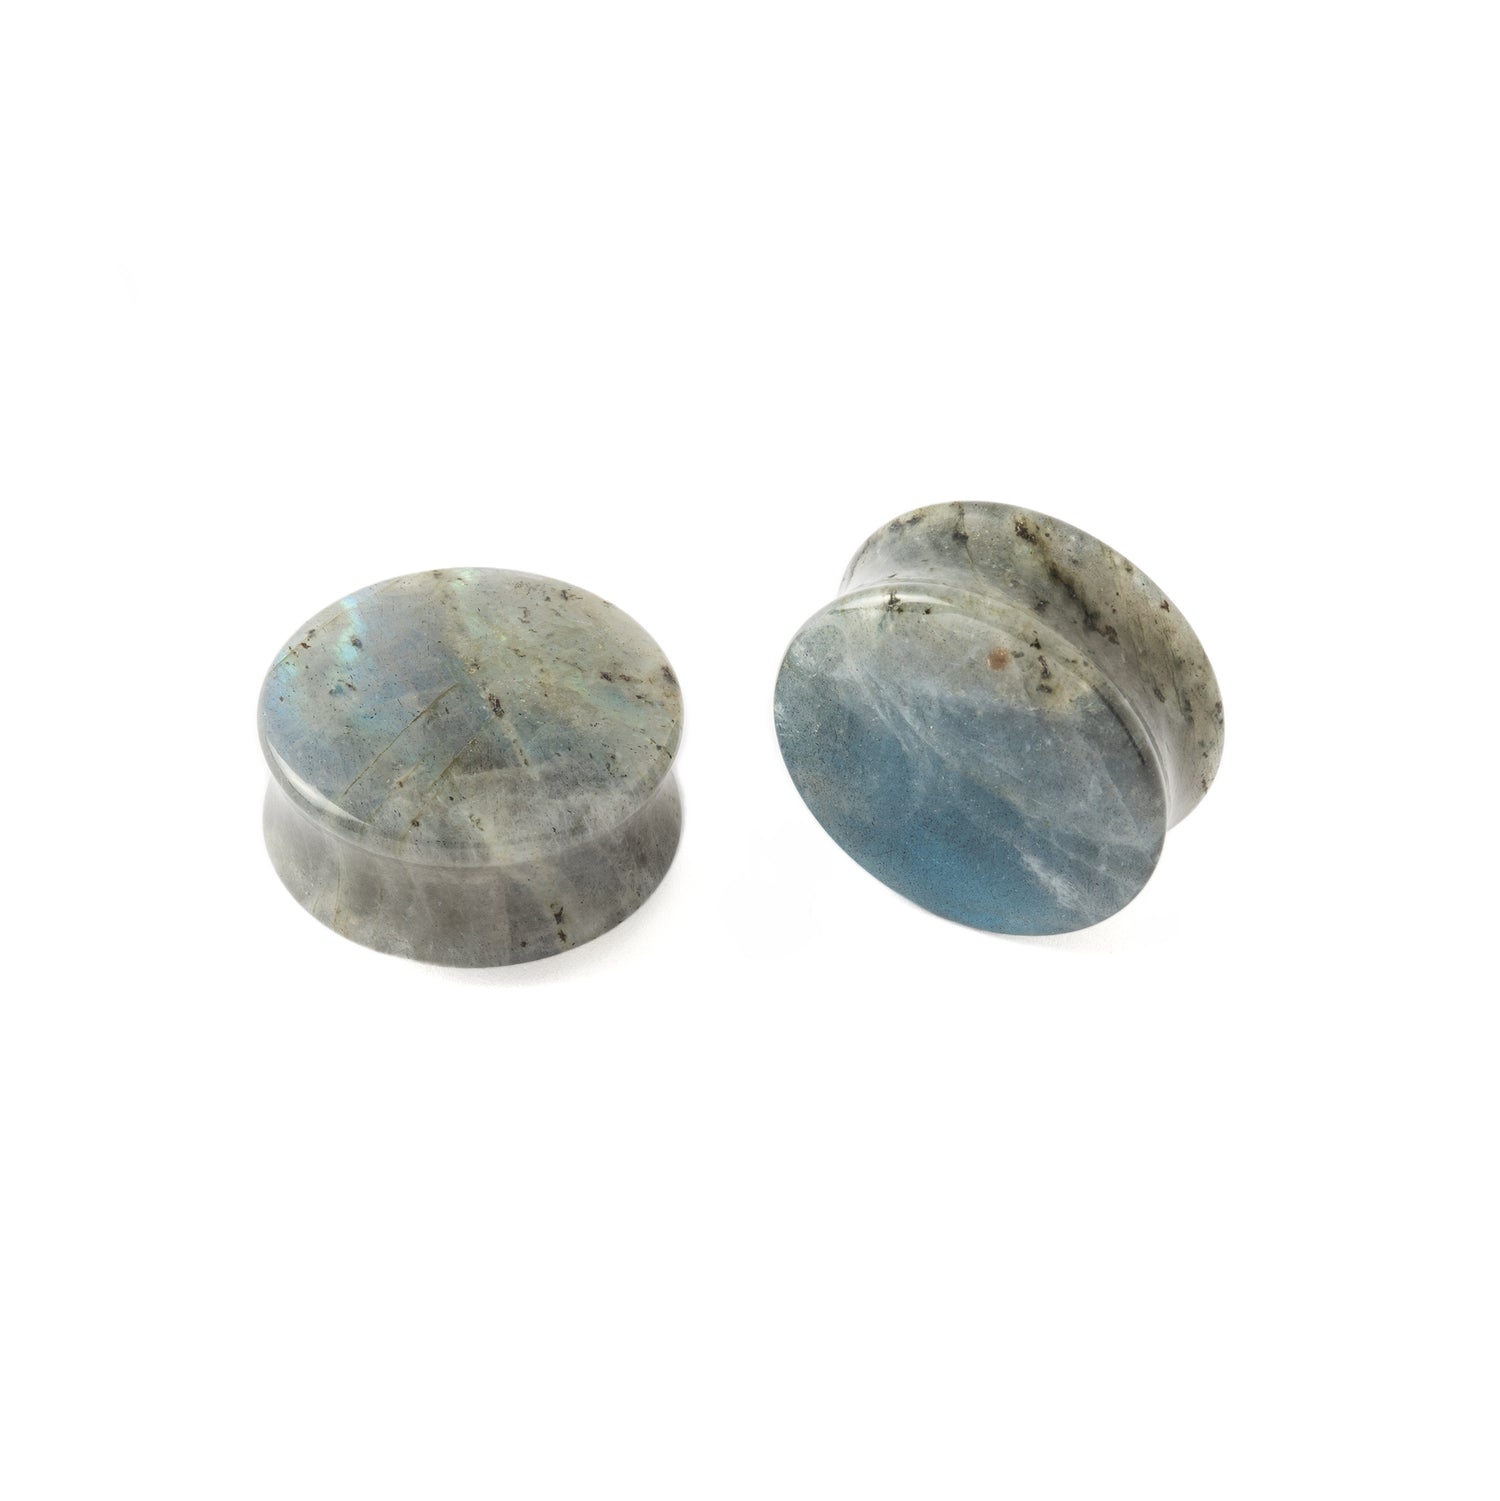 Two Labradorite Plugs front and side view